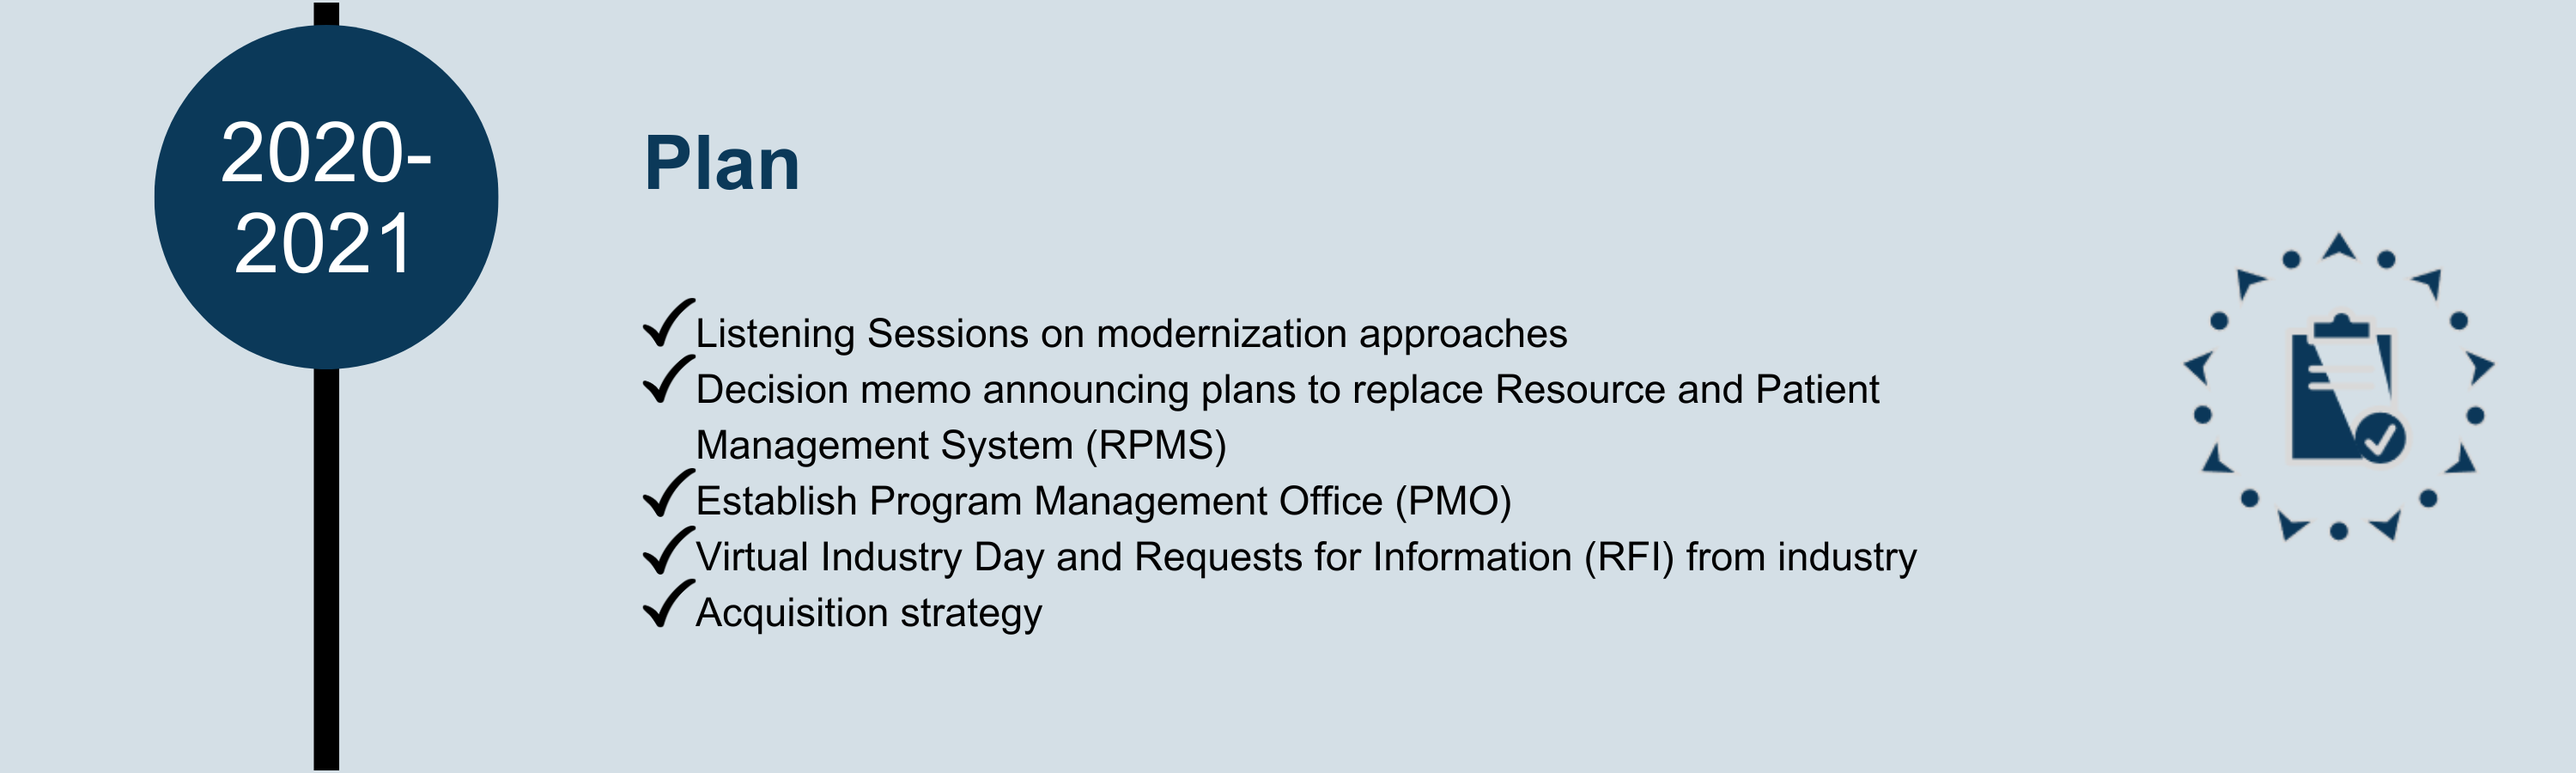 Plan (2019-2020)
- Listening Sessions on modernization approaches
- Decision memo announcing plans to replace Resource and Patient Management System (RPMS) 
- Establish Program Management Office (PMO)
- Virtual Industry Day and Requests for Information (RFI) from industry
- Acquisition strategy
